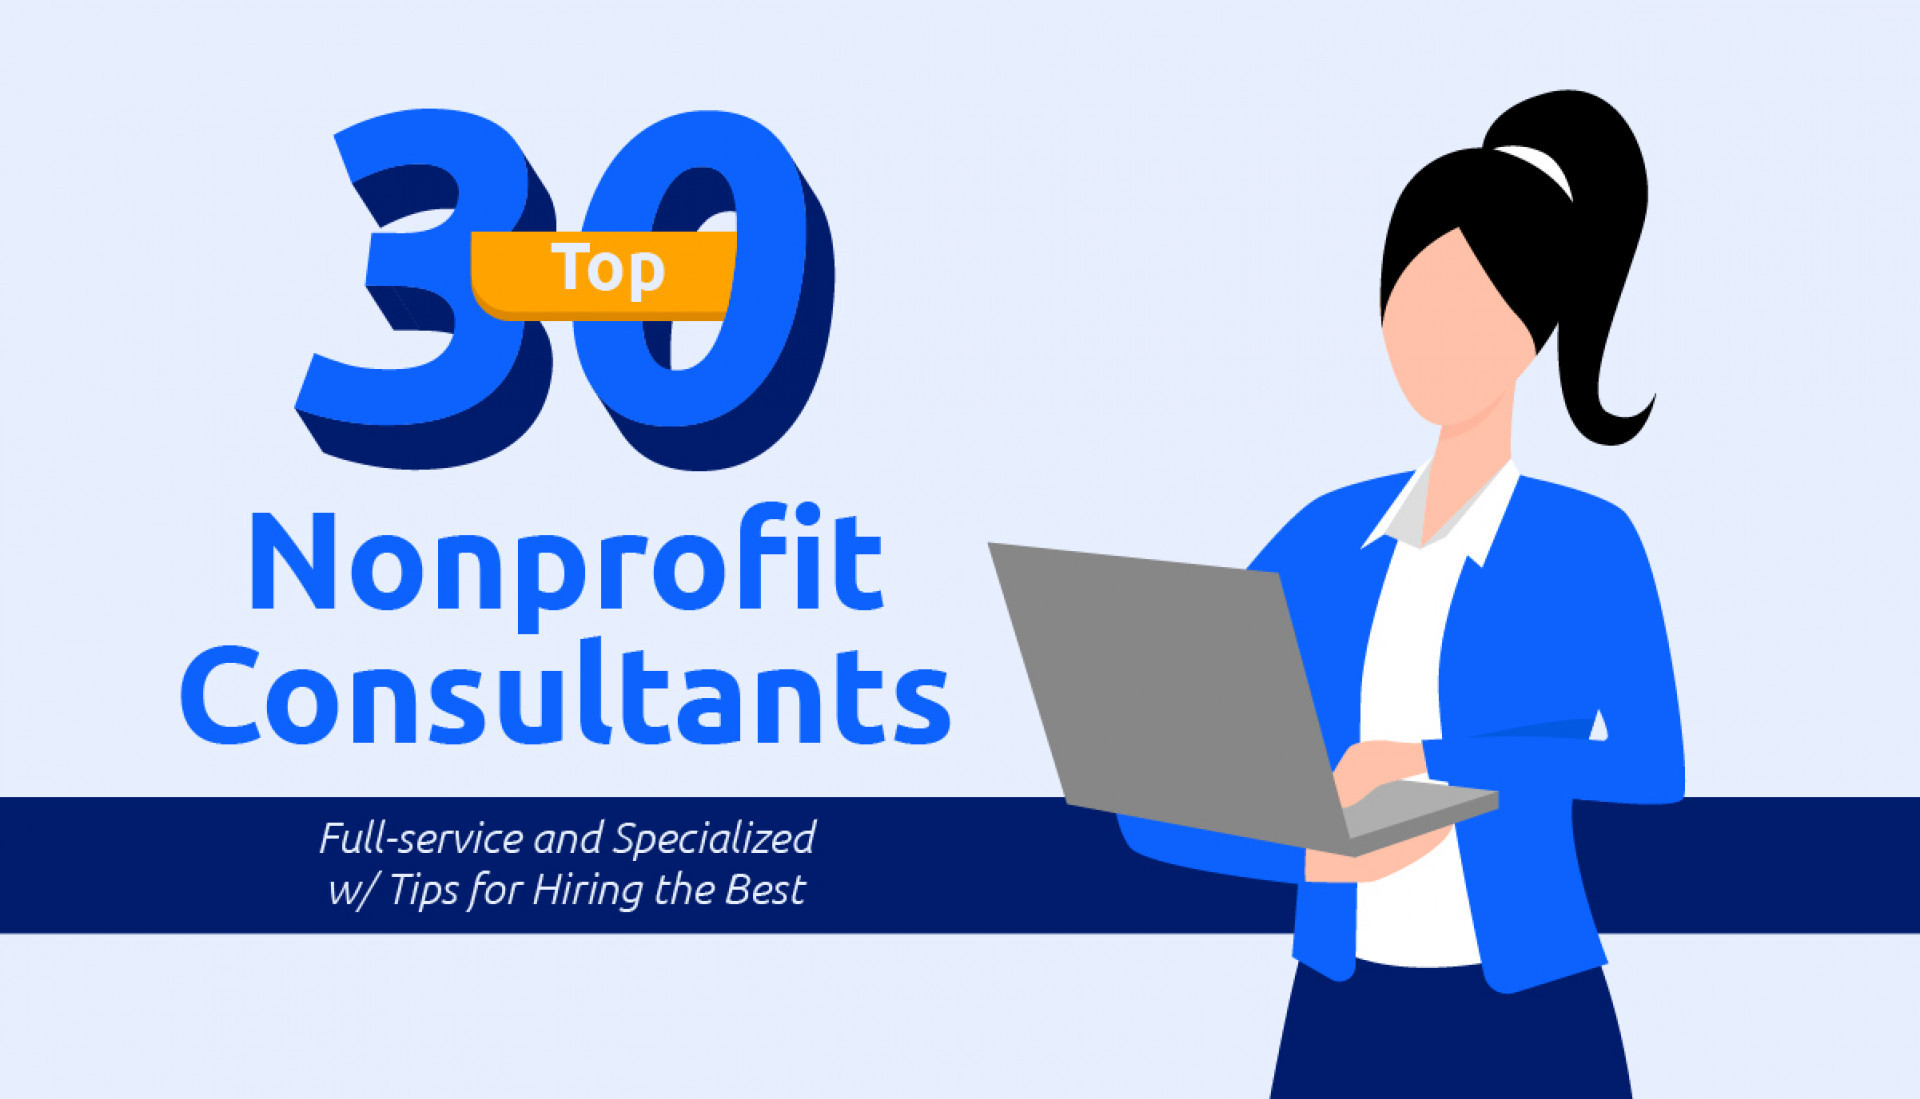 Top 30 Nonprofit Consultants [Full-Service and Specialized] with Tips for Hiring the Best